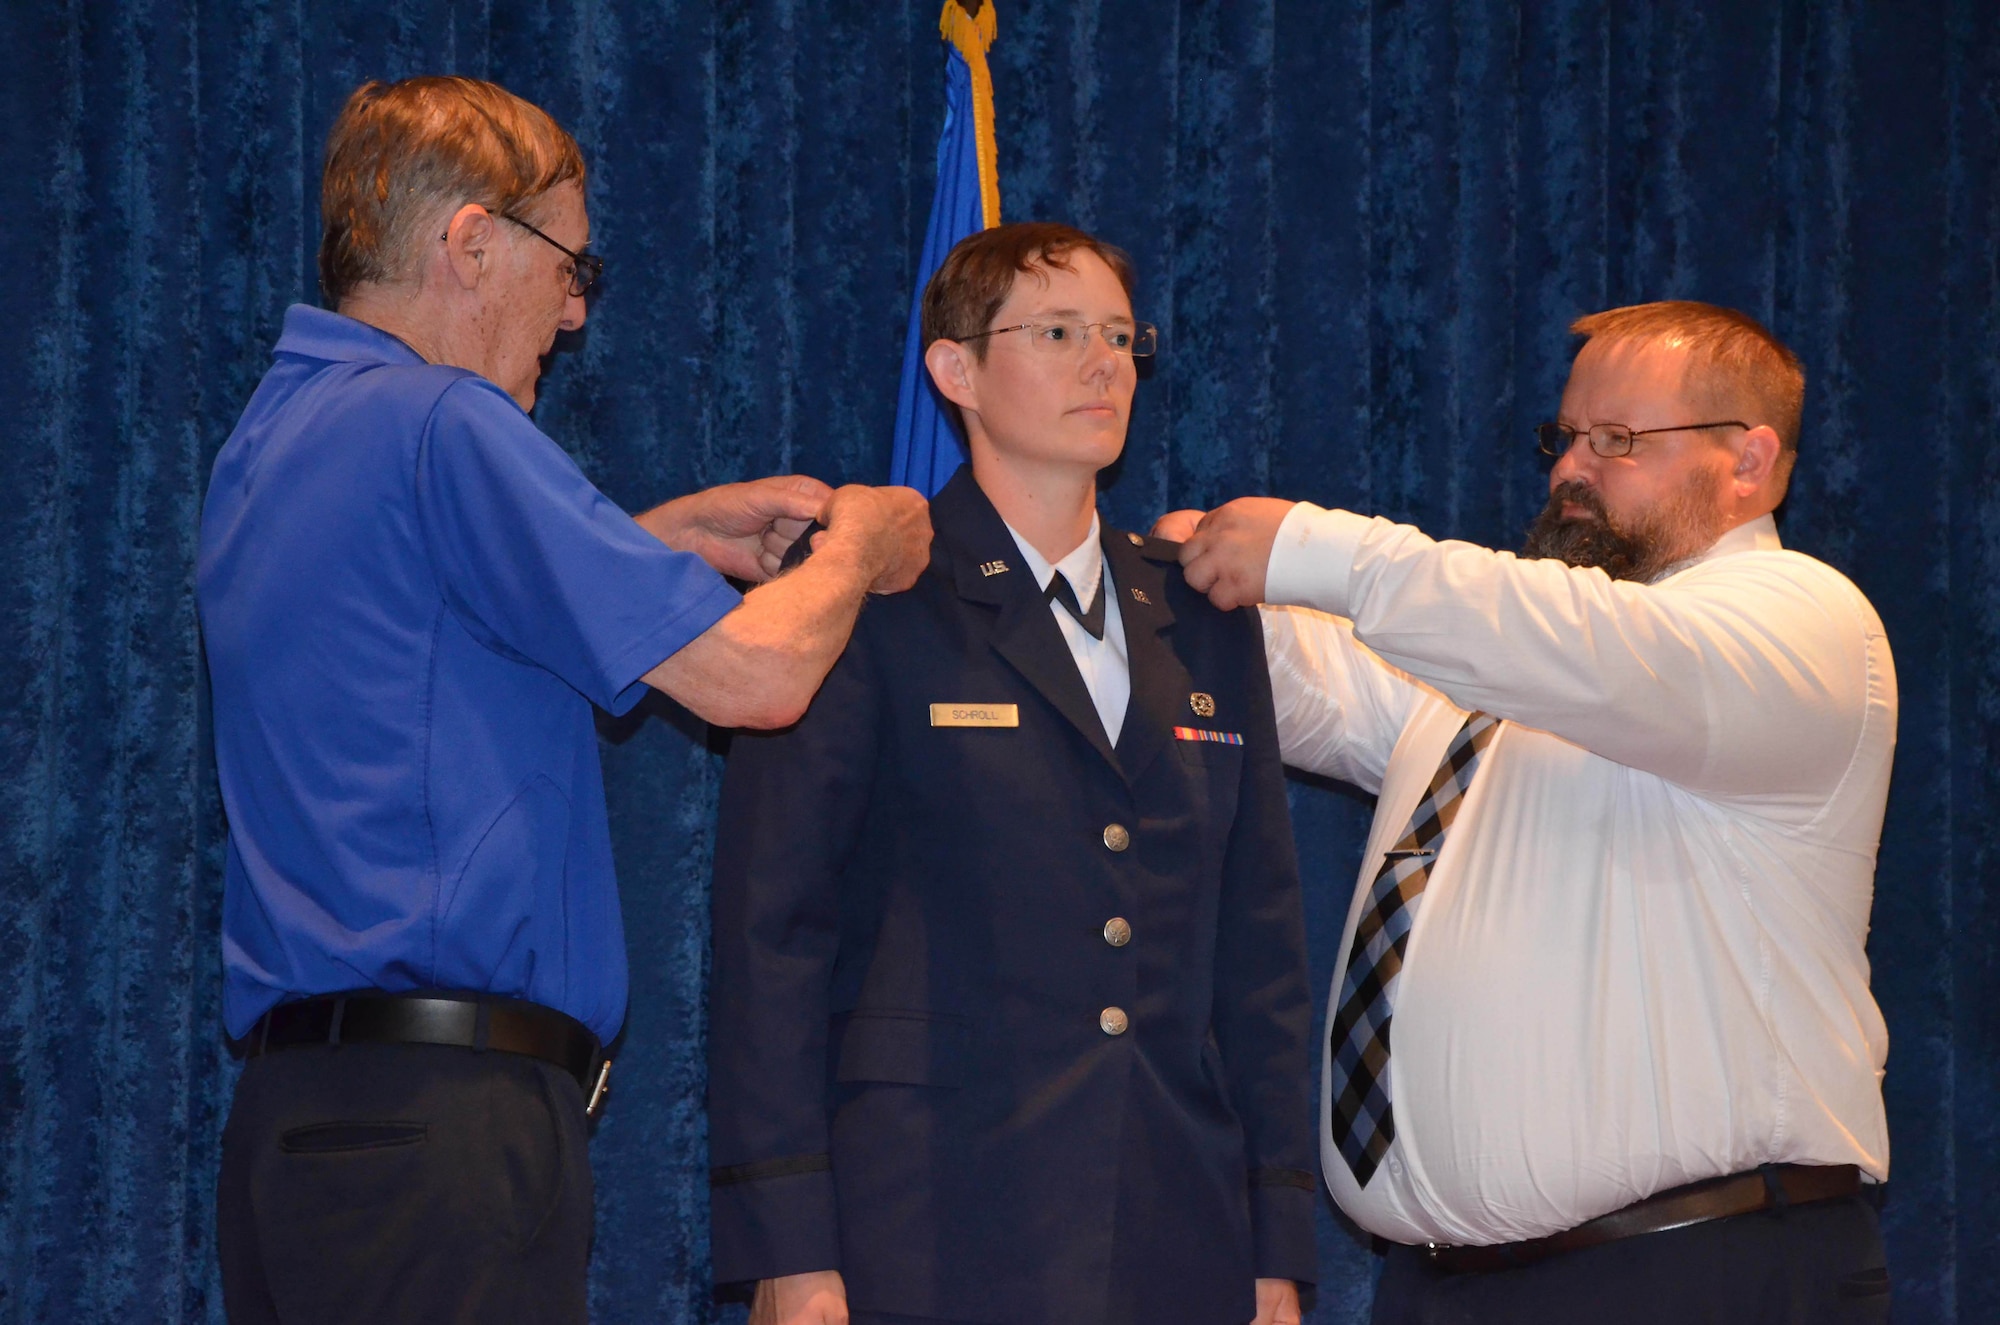 2nd Lt. Cynthia A. Schroll (center) stands at attention as her father Stephen (left) and brother Brandon (right) pin on her second lieutenant bars after she took the oath of commissioning at Officer Training School May 30, 2019.  (U.S. Air Force photo by Susan A. Romano)